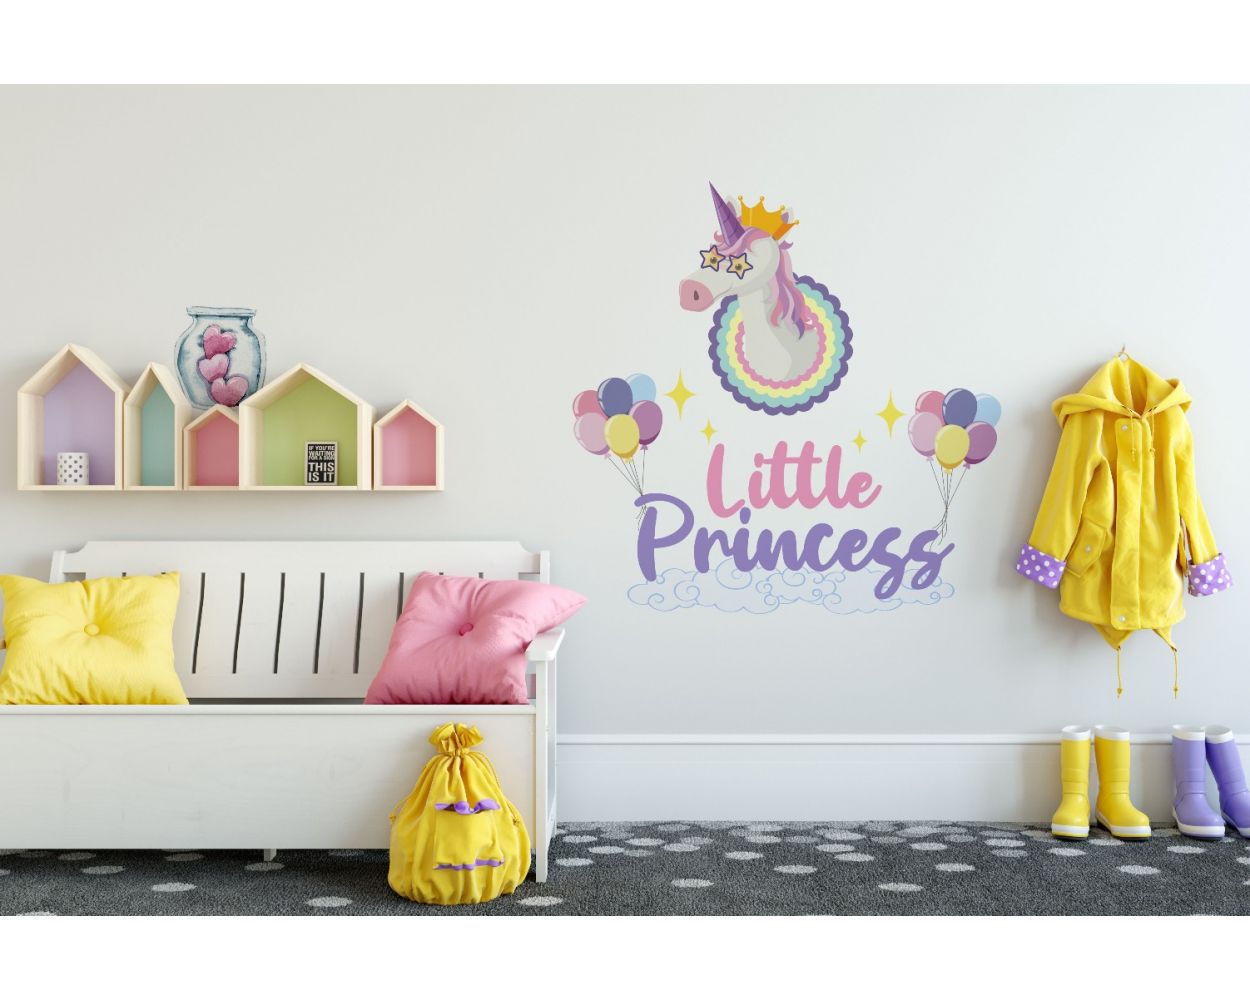 Cute & Beautiful Unicorn Vinyl Wall Stickers For Your Little Princess Room Wall Decor